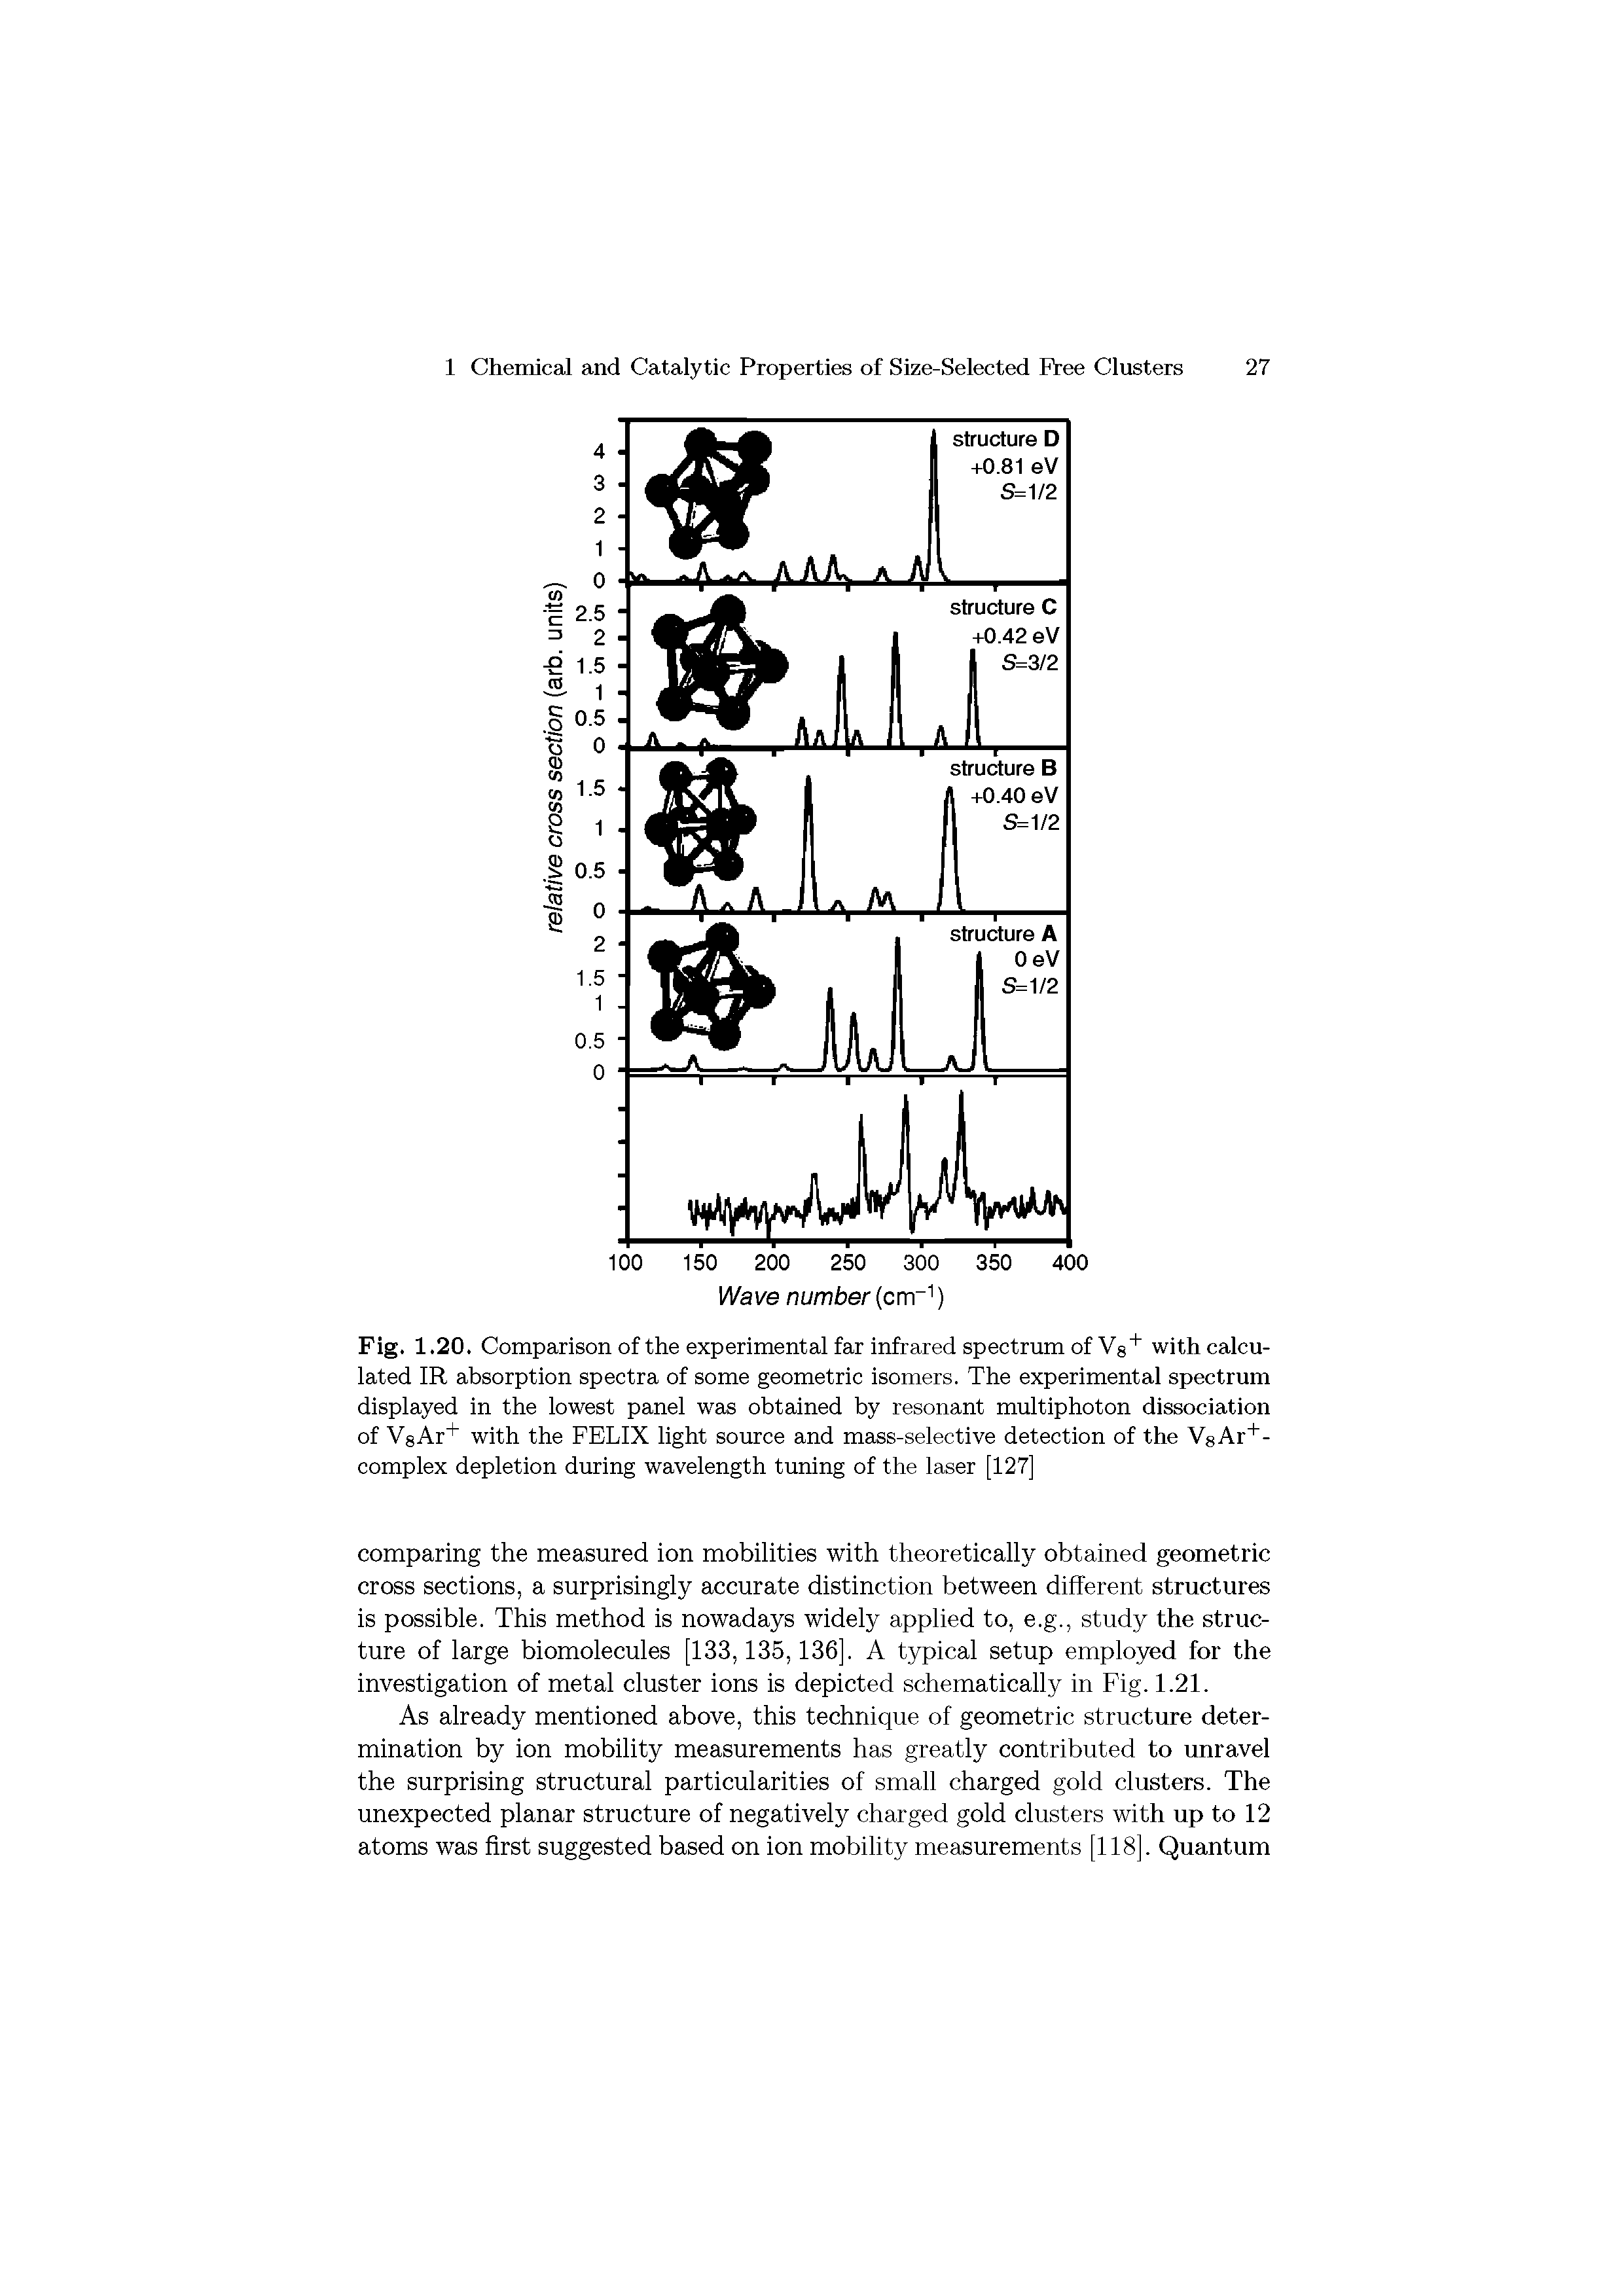 Fig. 1.20. Comparison of the experimental far infrared spectrum of Vs with calculated IR absorption spectra of some geometric isomers. The experimental spectrum displayed in the lowest panel was obtained by resonant multiphoton dissociation of VeAr with the FELIX light source and mass-selective detection of the VsAr" -complex depletion during wavelength tuning of the laser [127]...